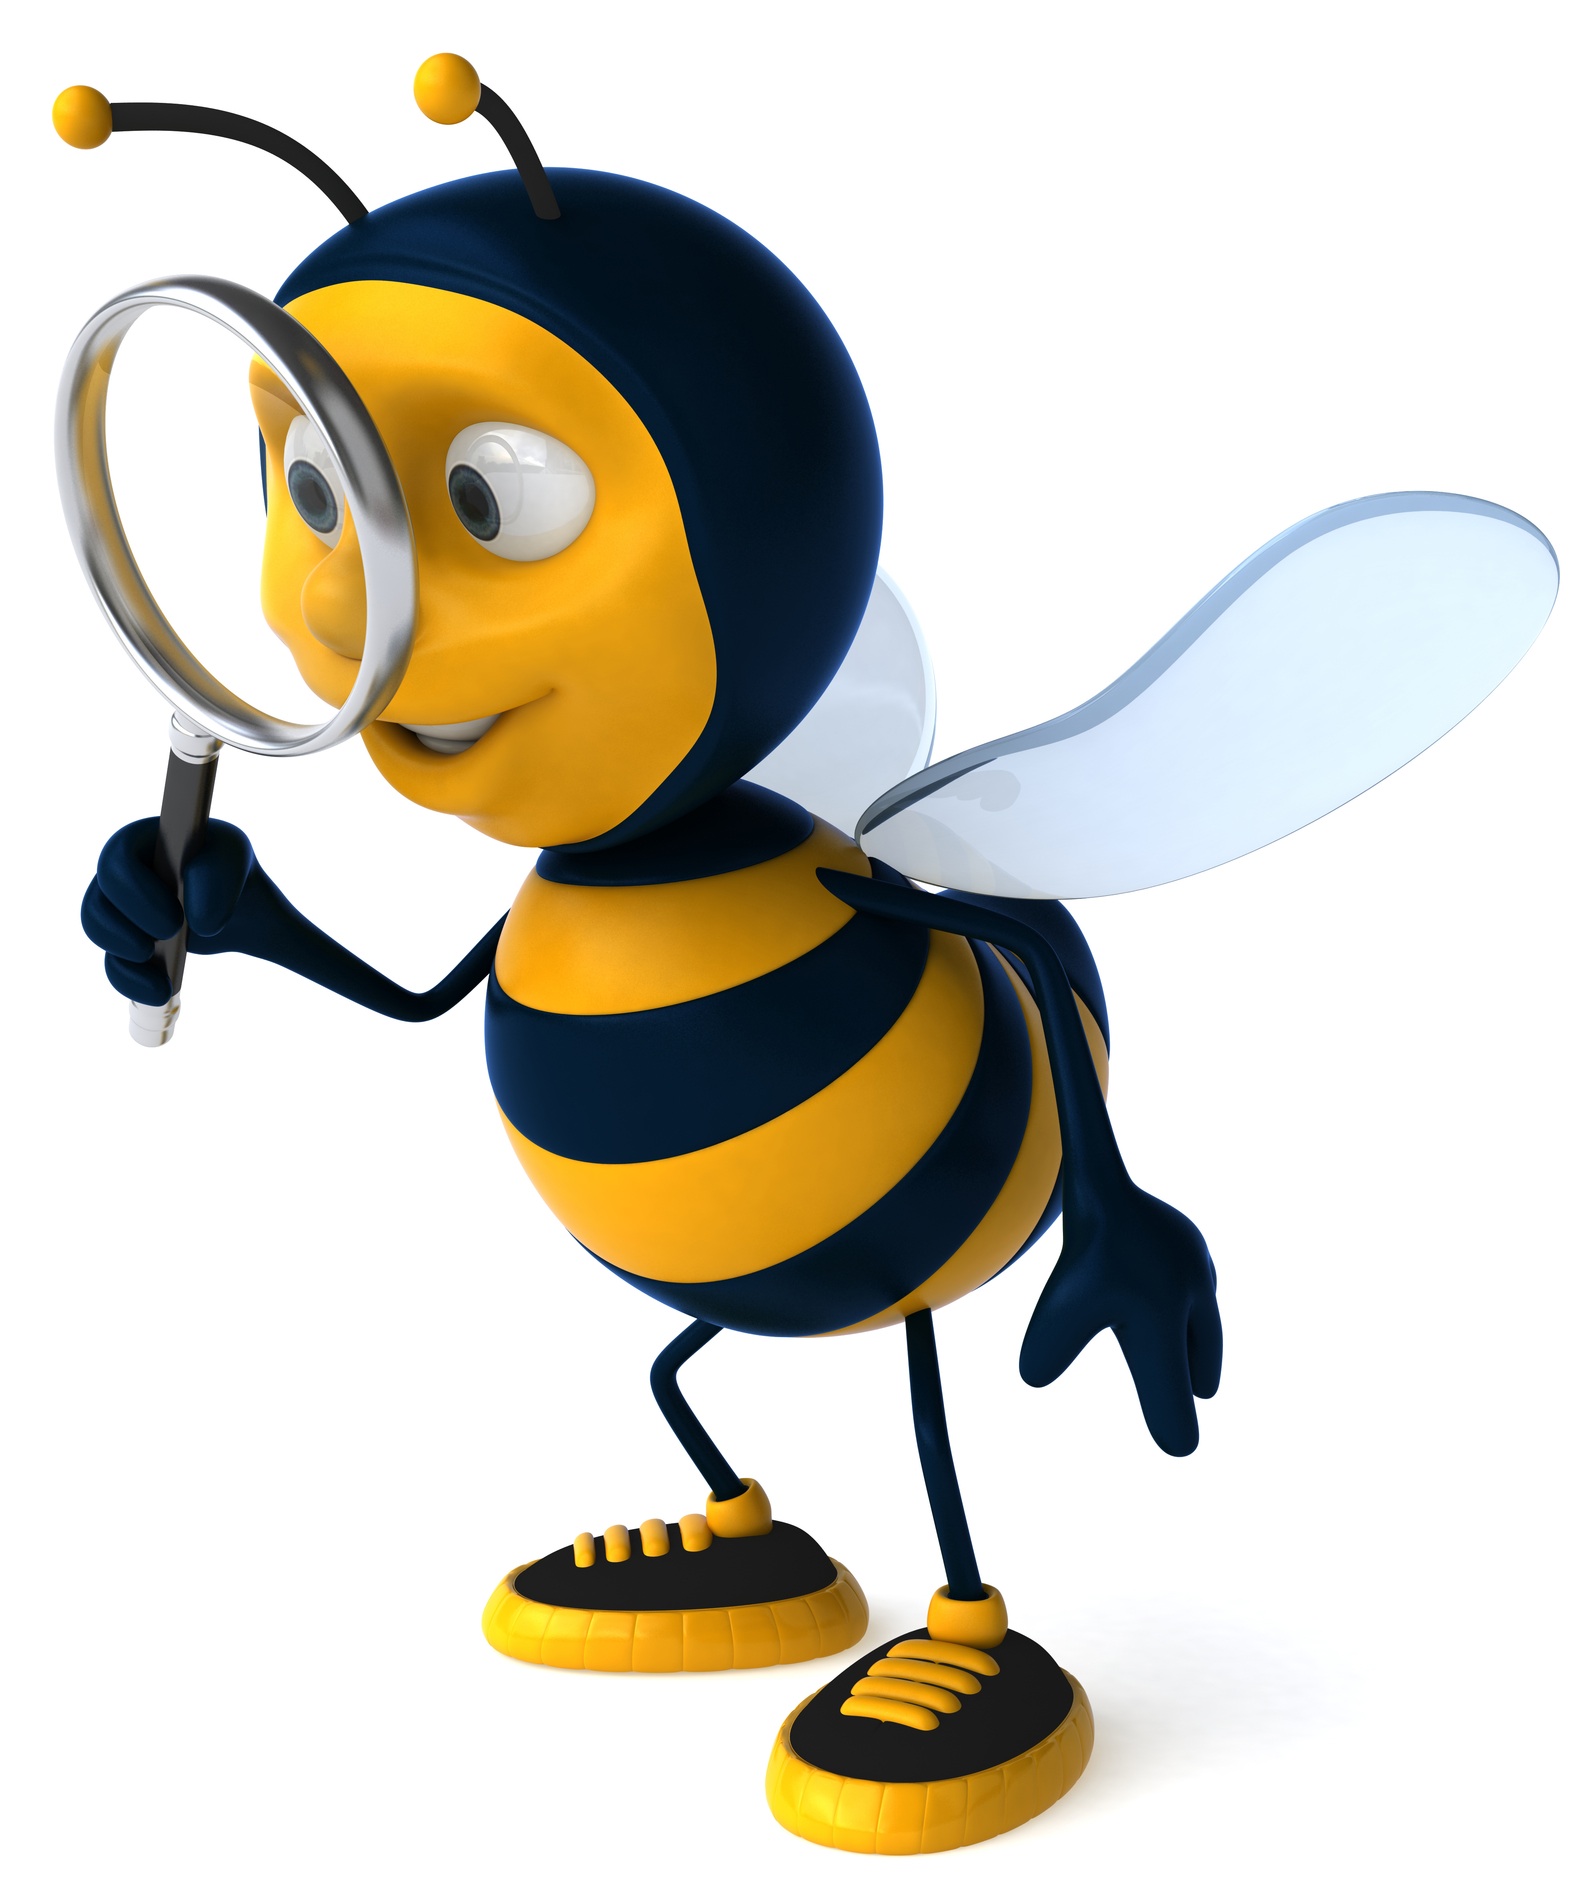 Bumble Bee Cartoon Images - ClipArt Best